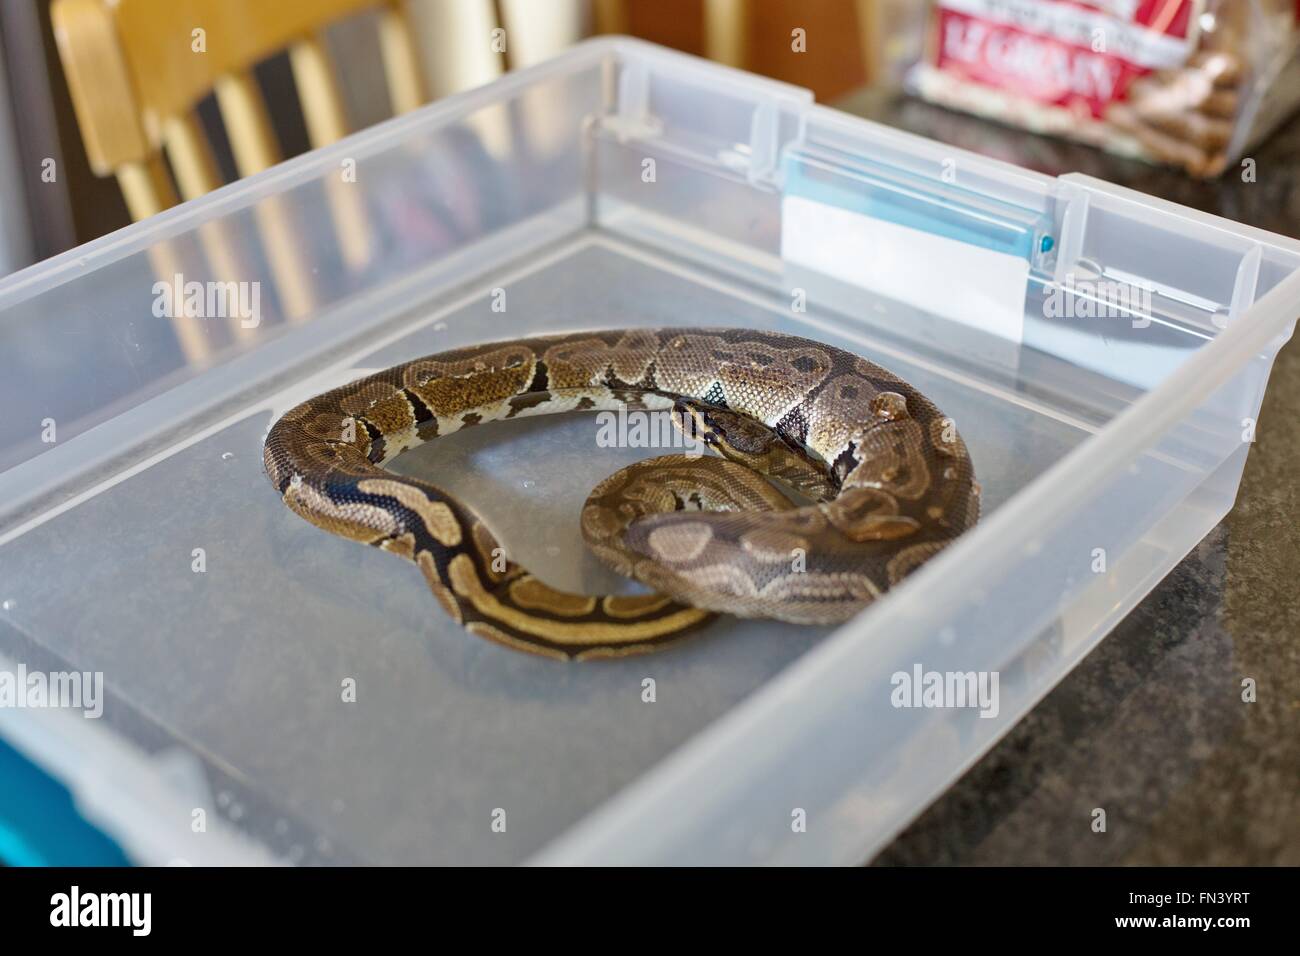 A Small Ball Python Snake Soaking In A Tub Of Water Stock